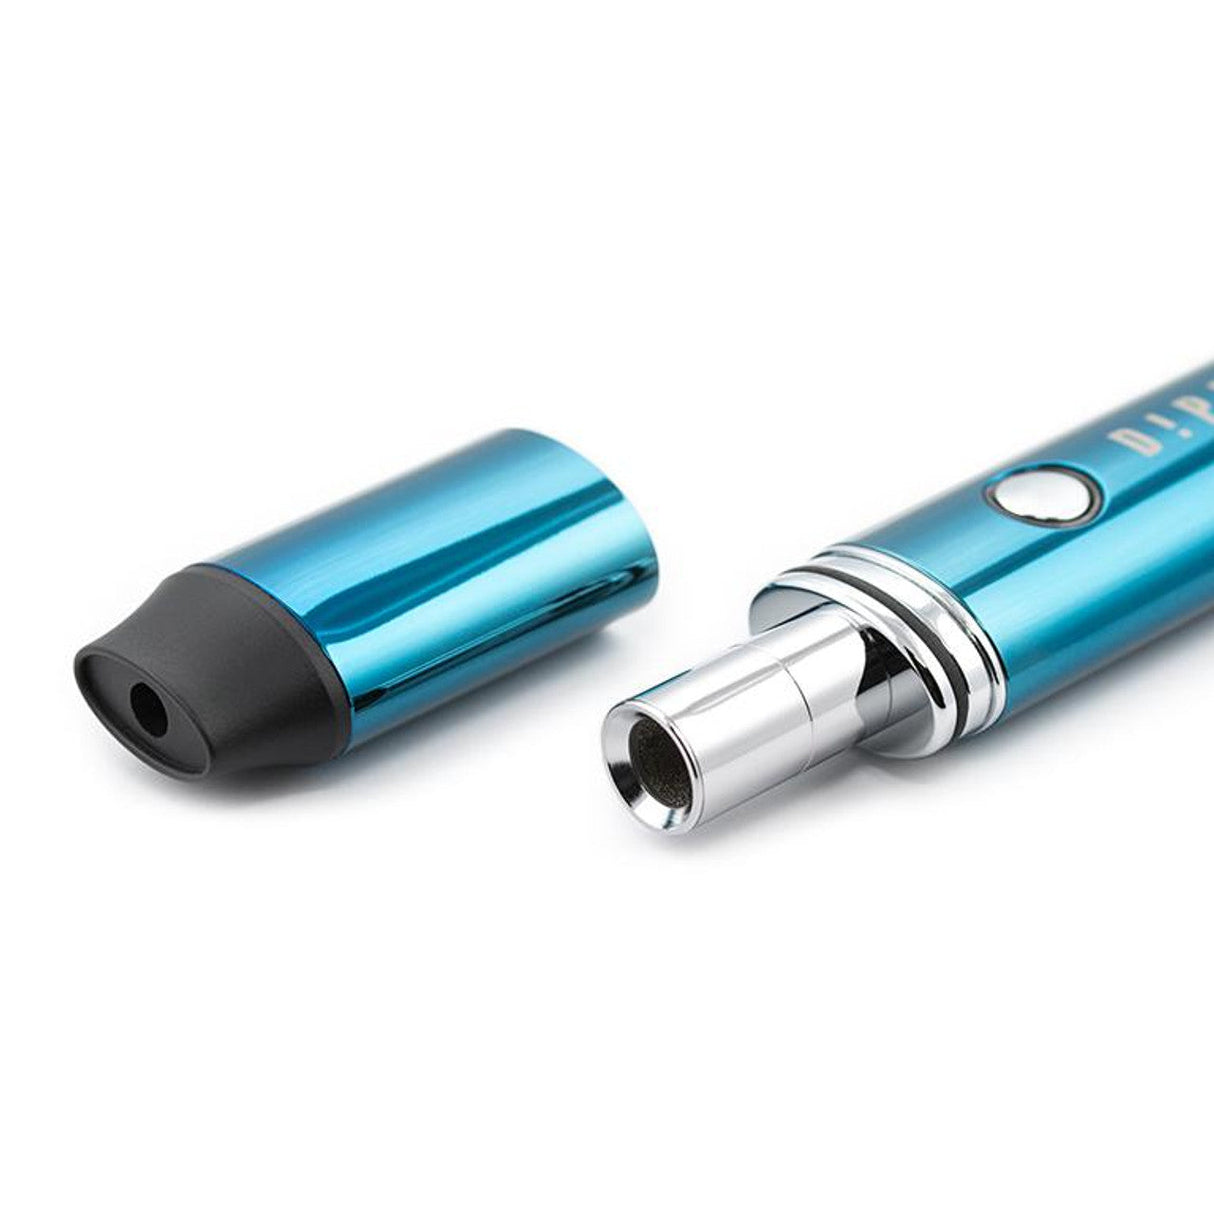 Dipper Vaporizer by Dip Devices in blue, close-up side view with quartz tip for concentrates